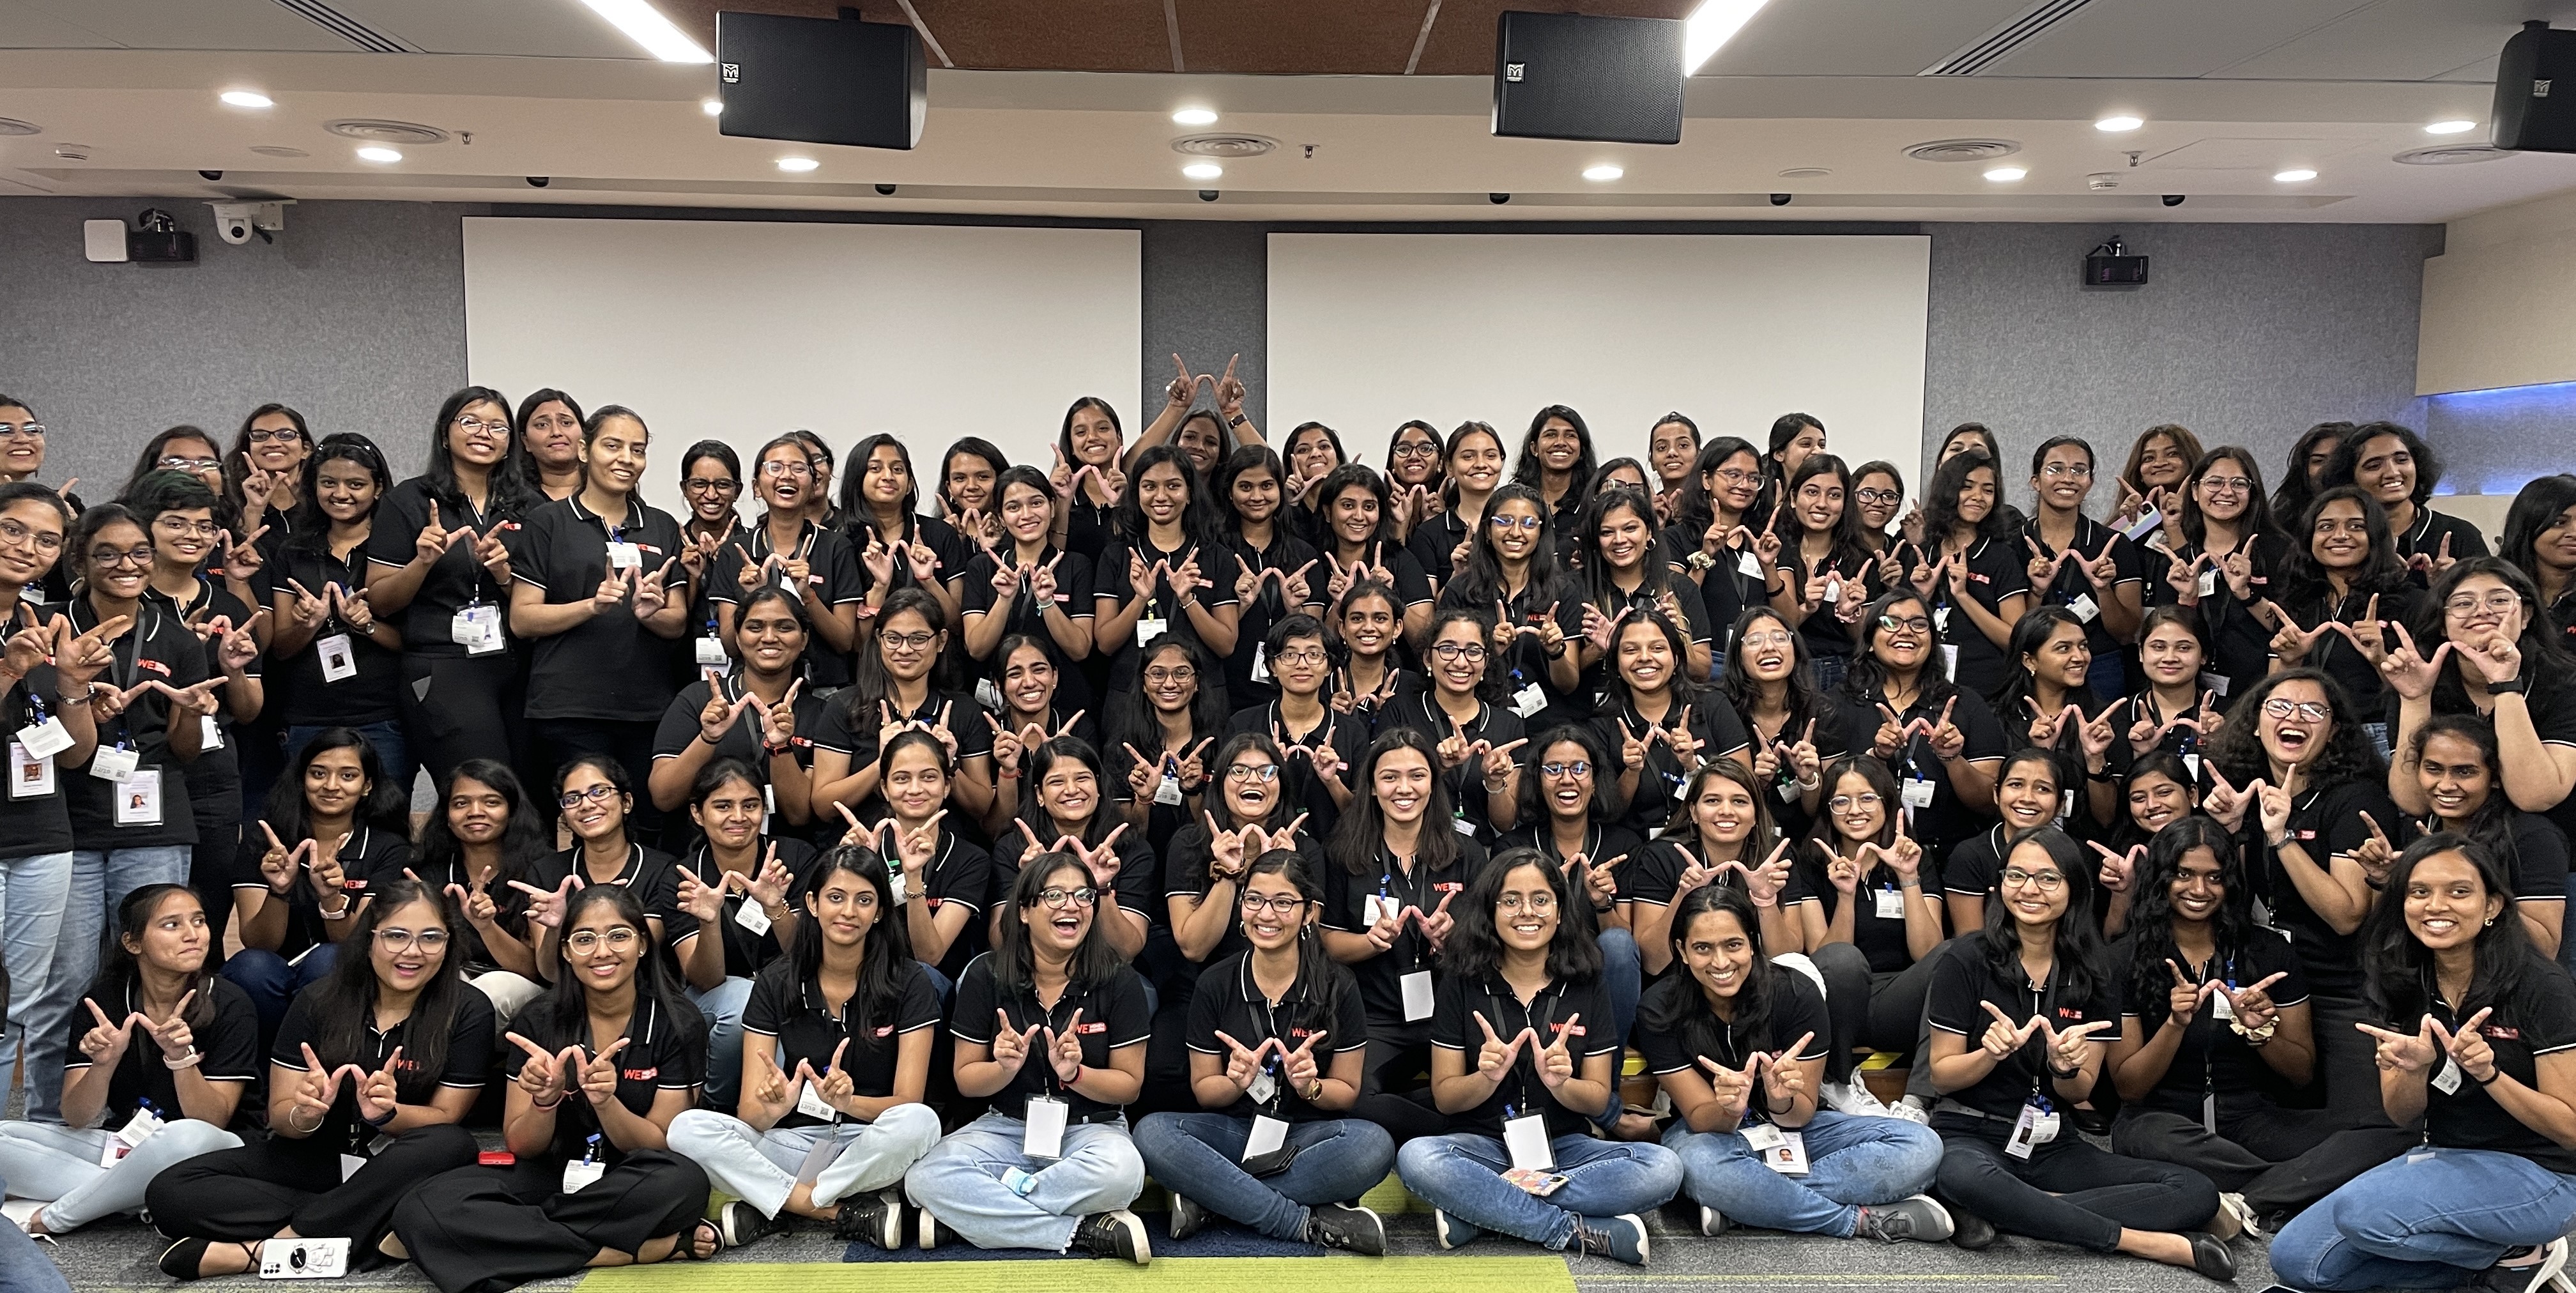 TalentSprint announces Fifth Edition of Women Engineers (WE) Program, supported by Google